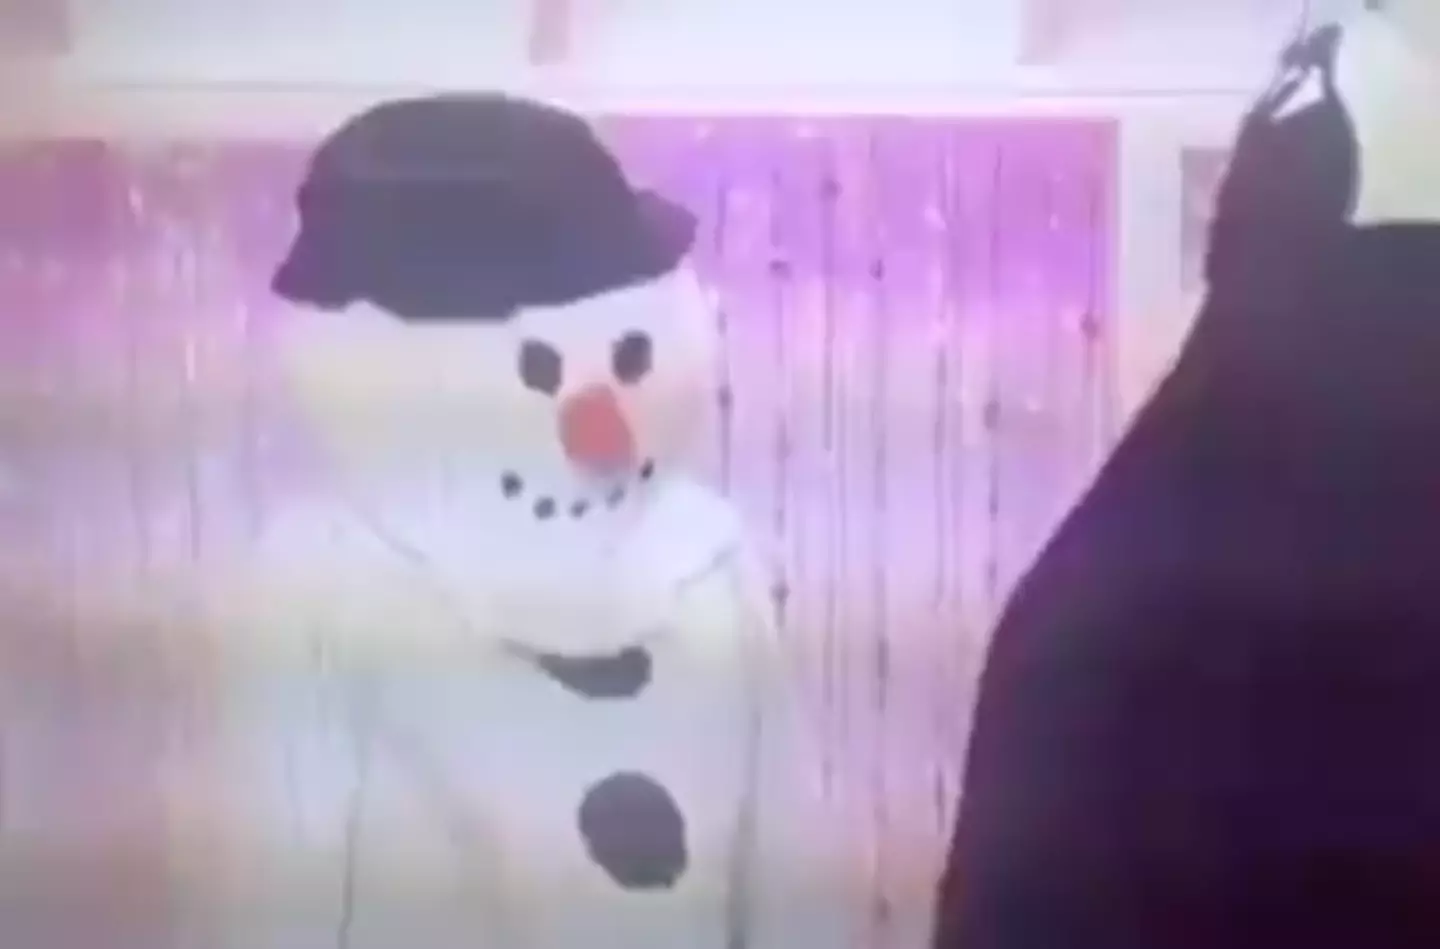 Many people said they chose a creepy-looking snowman.